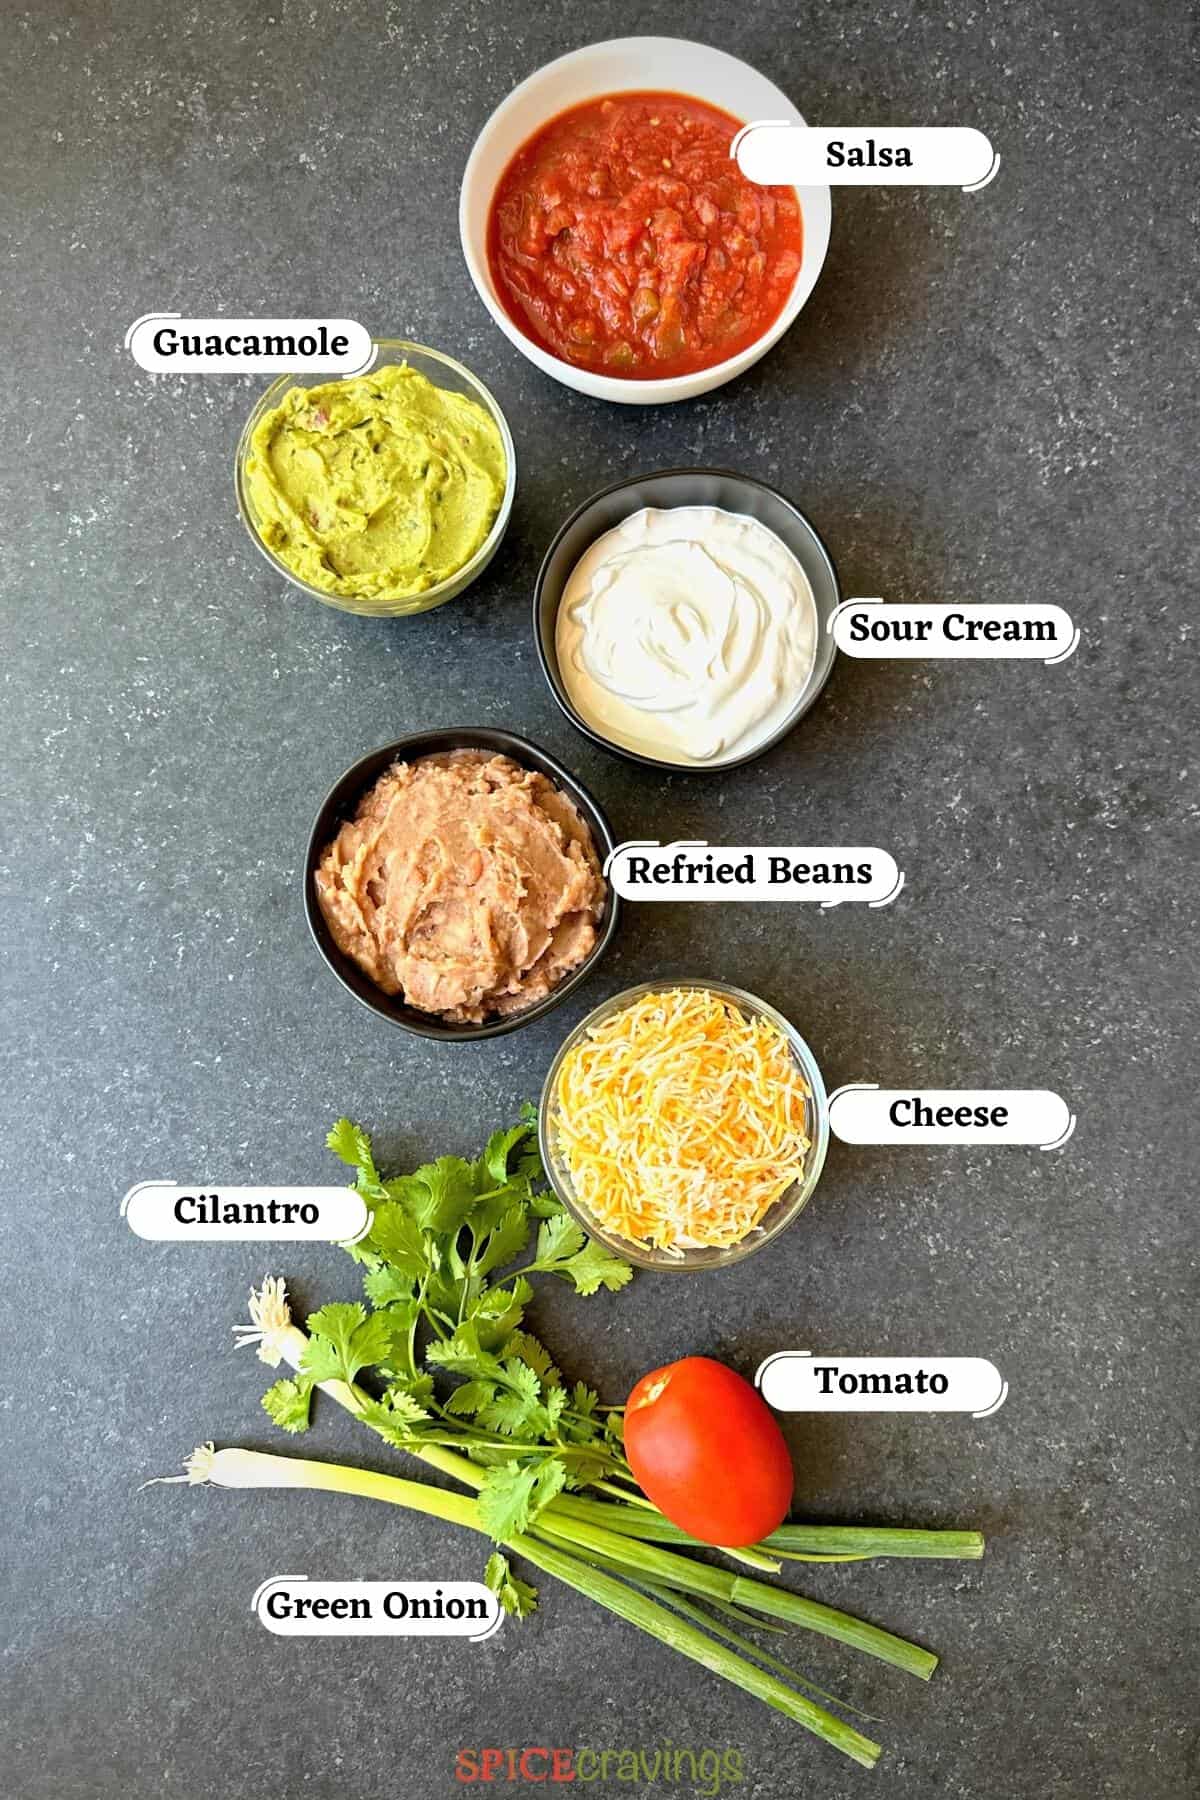 Beans, guacamole, sour cream among other ingredients on grey board